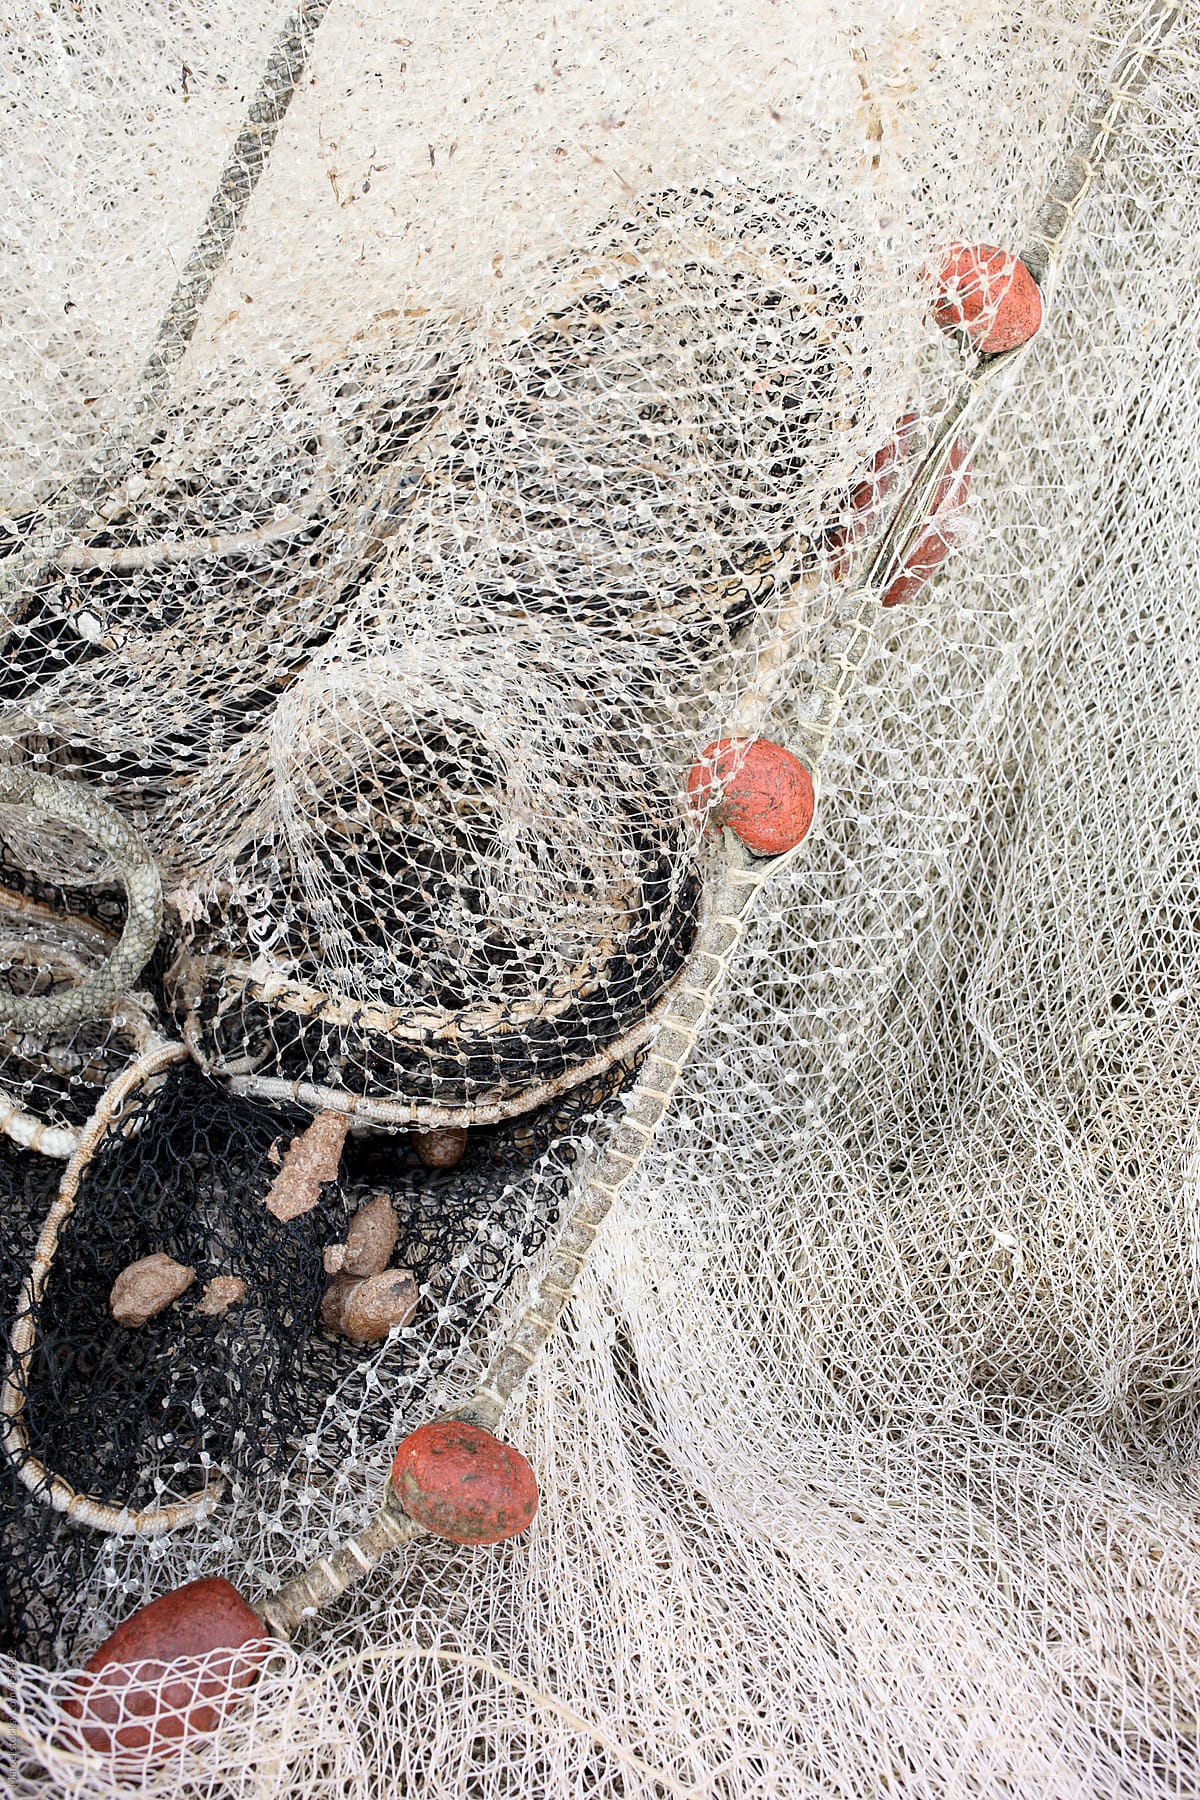 Wet fishingnets, hung out to dry